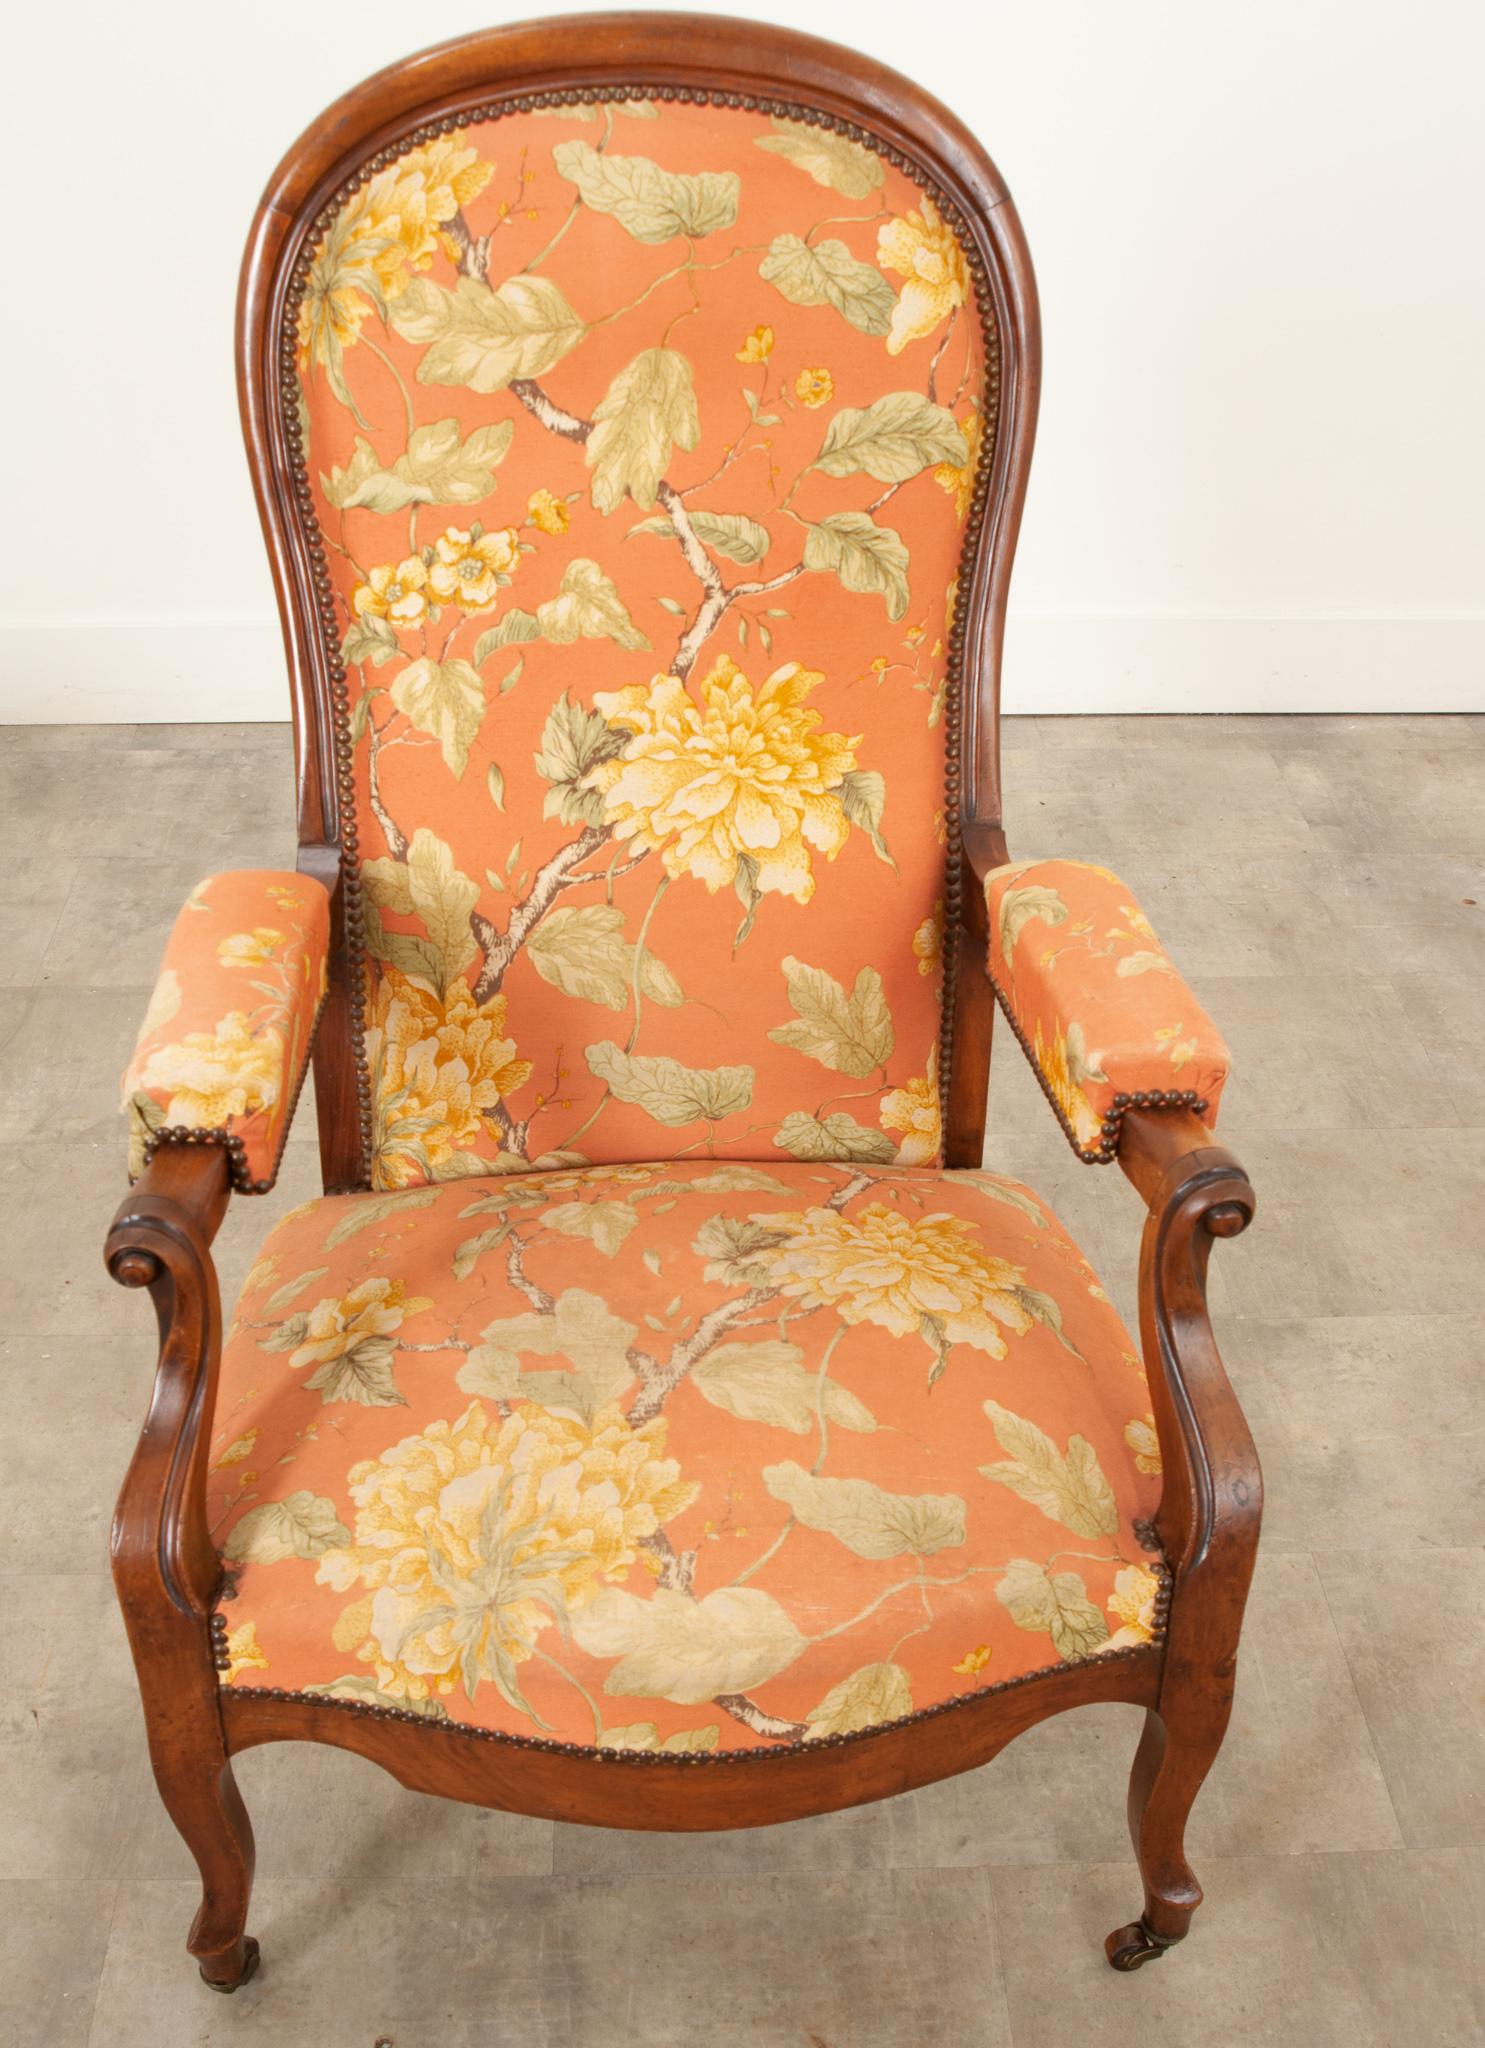 Hand-Crafted English 19th Century Upholstered Mahogany Recliner For Sale